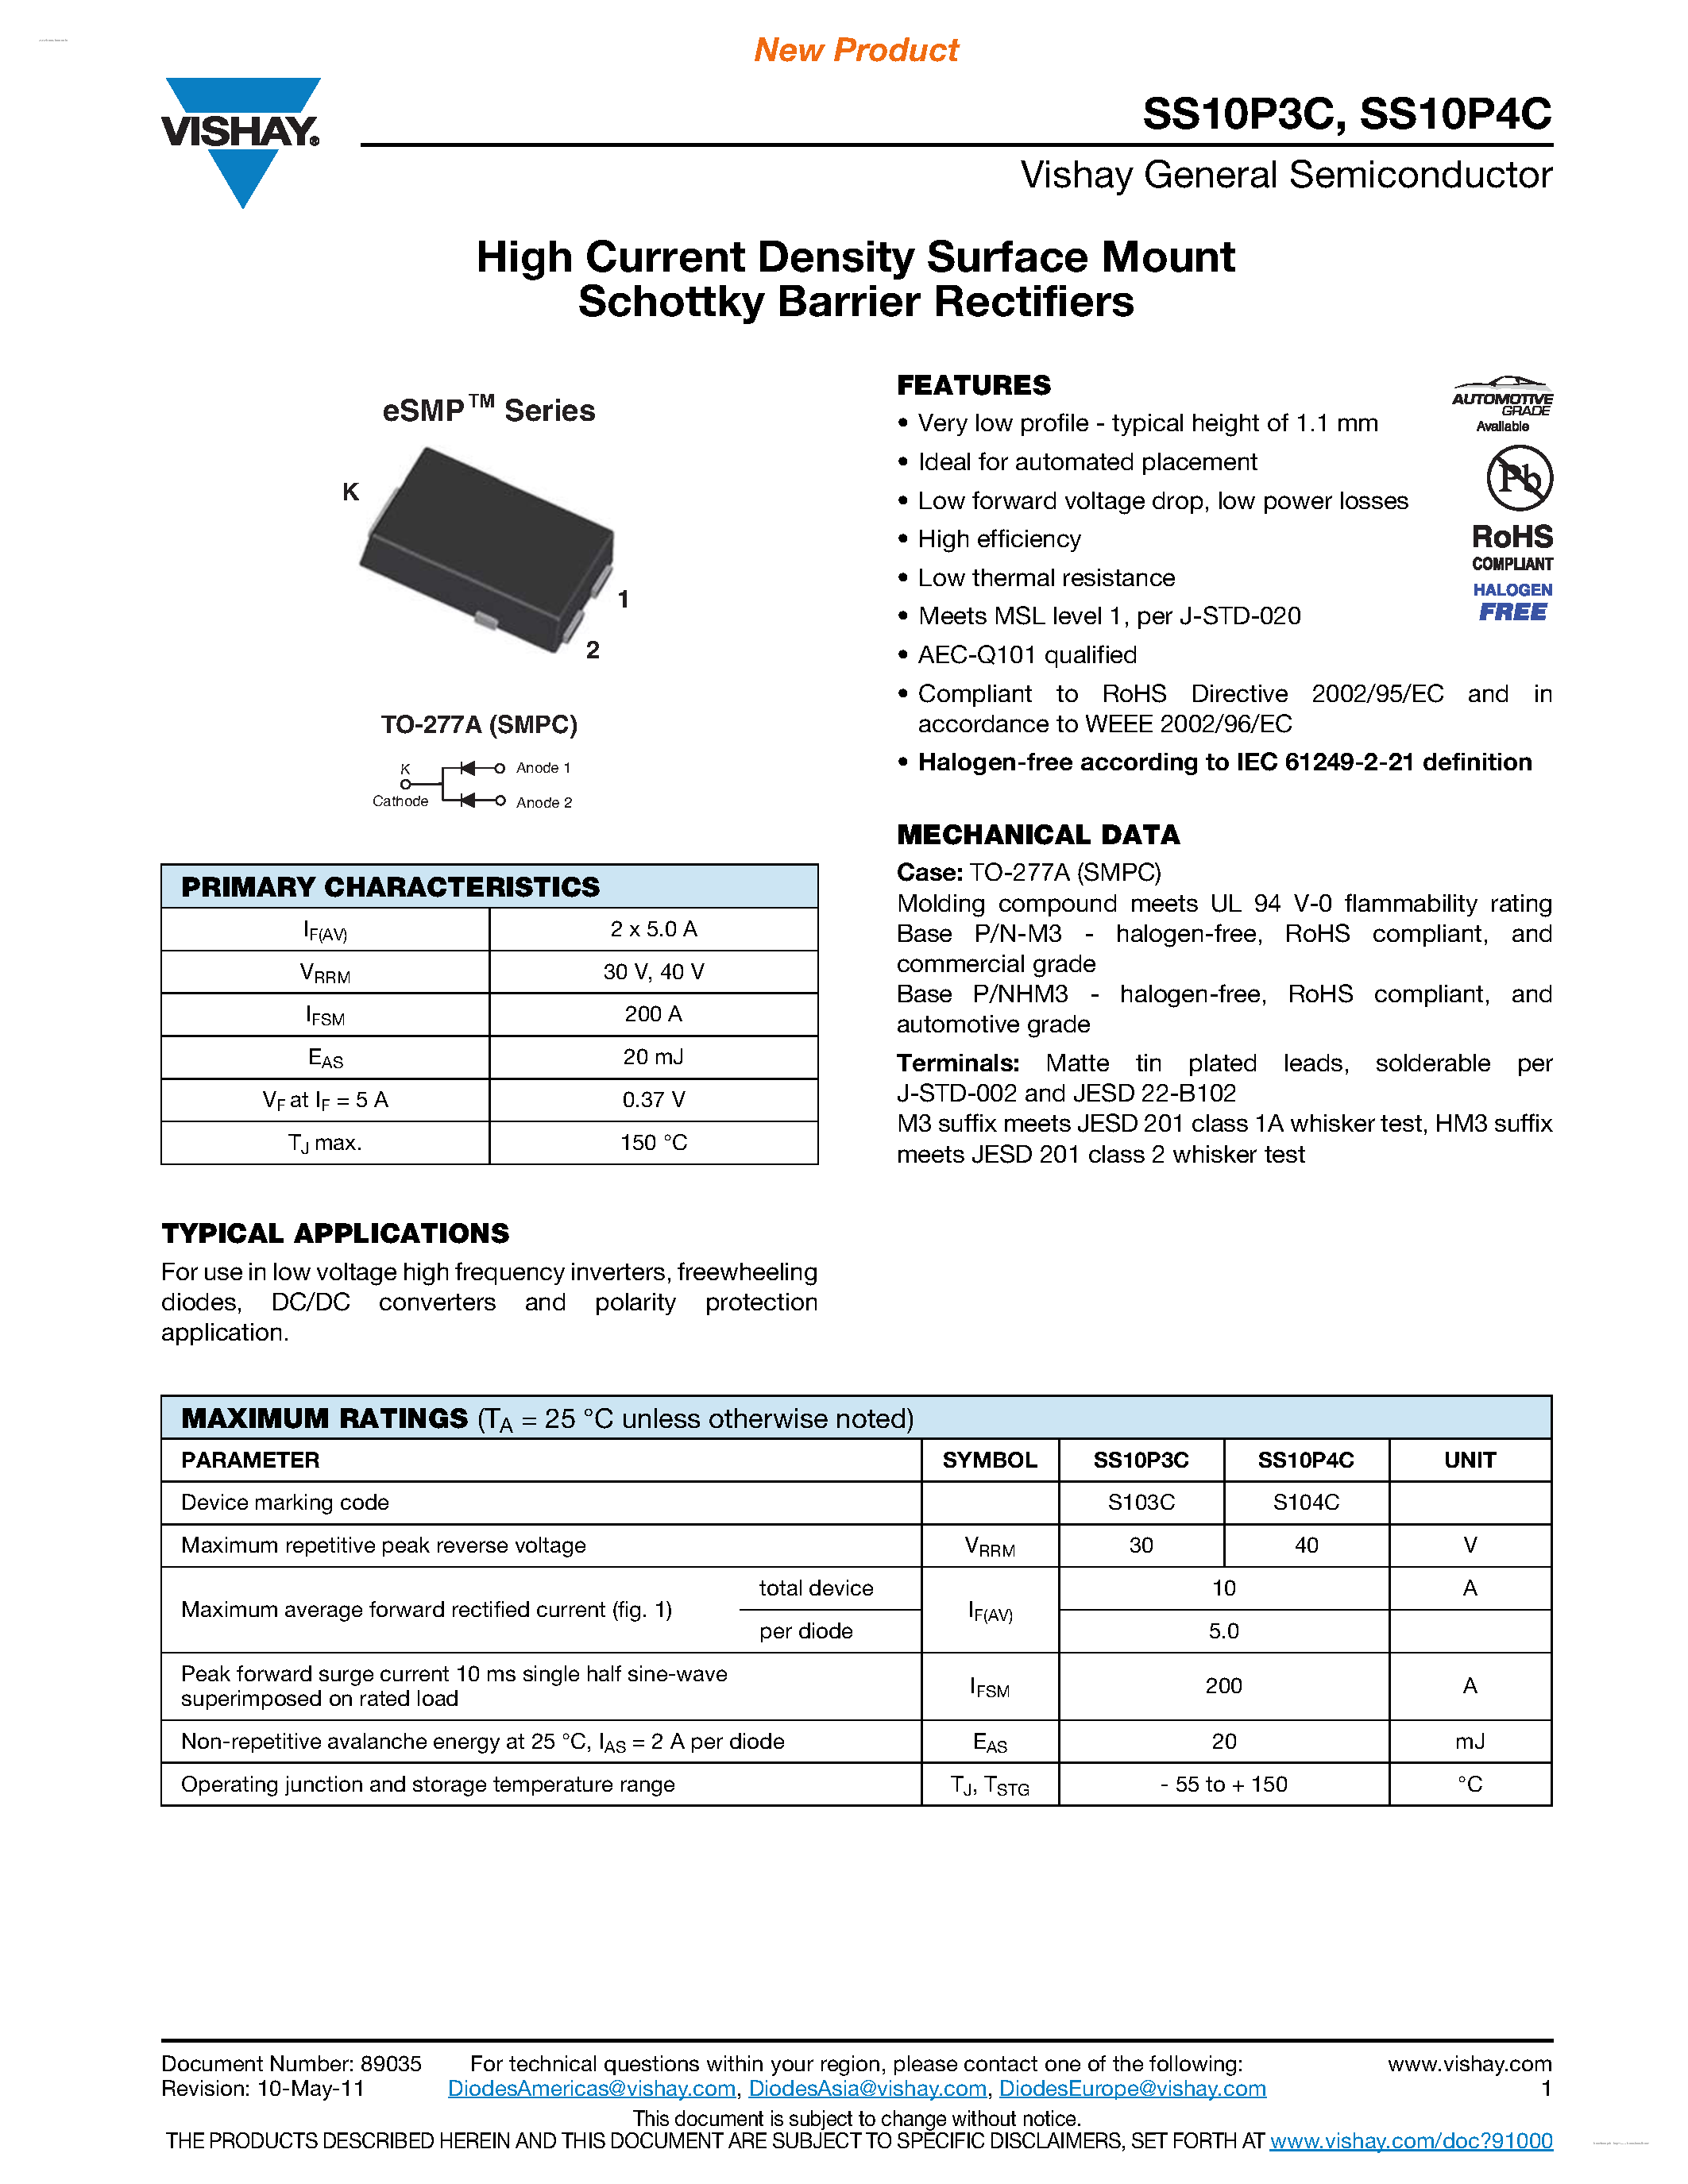 Даташит SS10P3C - (SS10P3C / SS10P4C) High Current Density Surface Mount Schottky Barrier Rectifiers страница 1